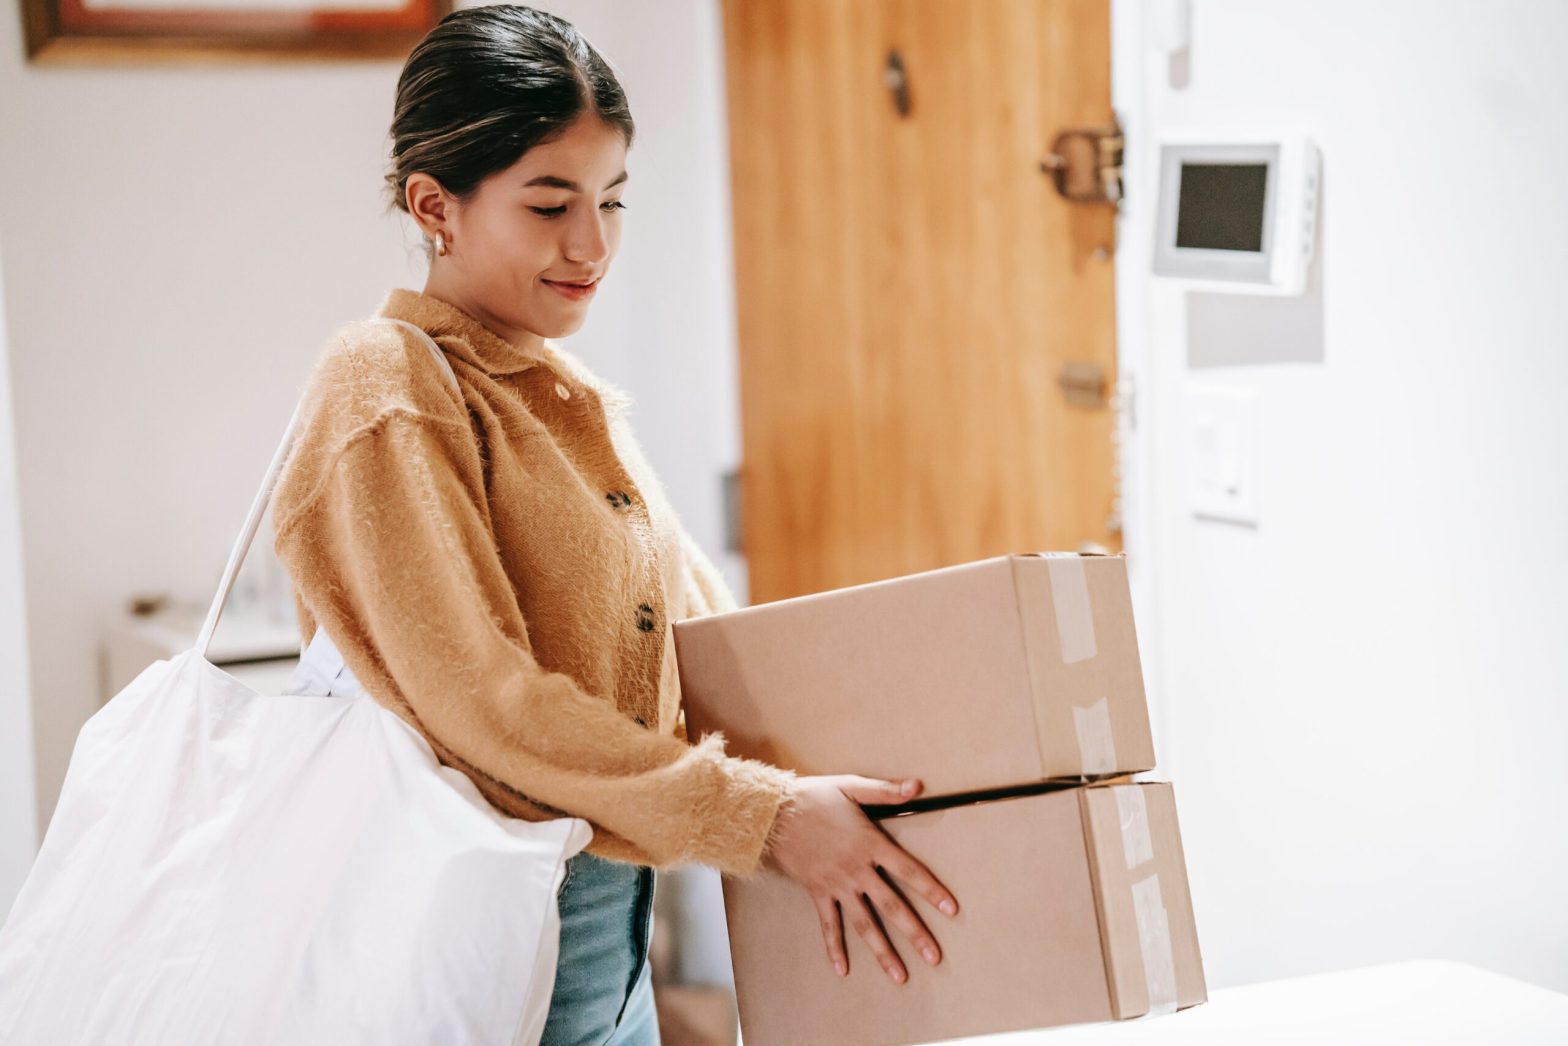 Woman moving boxes